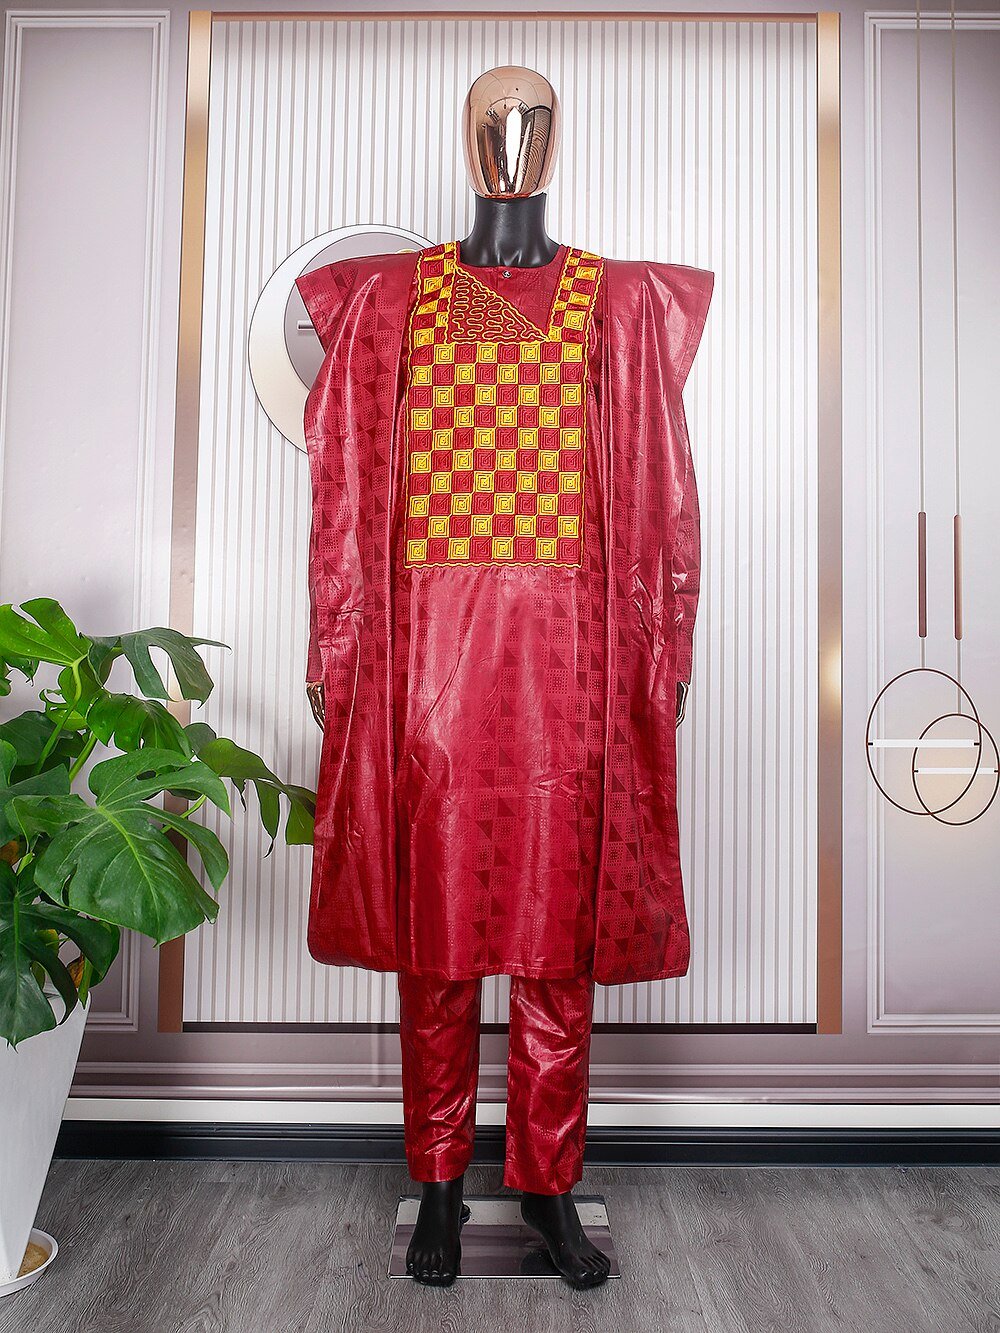 3PC Tradition Embroidery Set Clothing - African Clothes for Men - Bazin Red Shirt, Pants, Coat and Robe - Flexi Africa